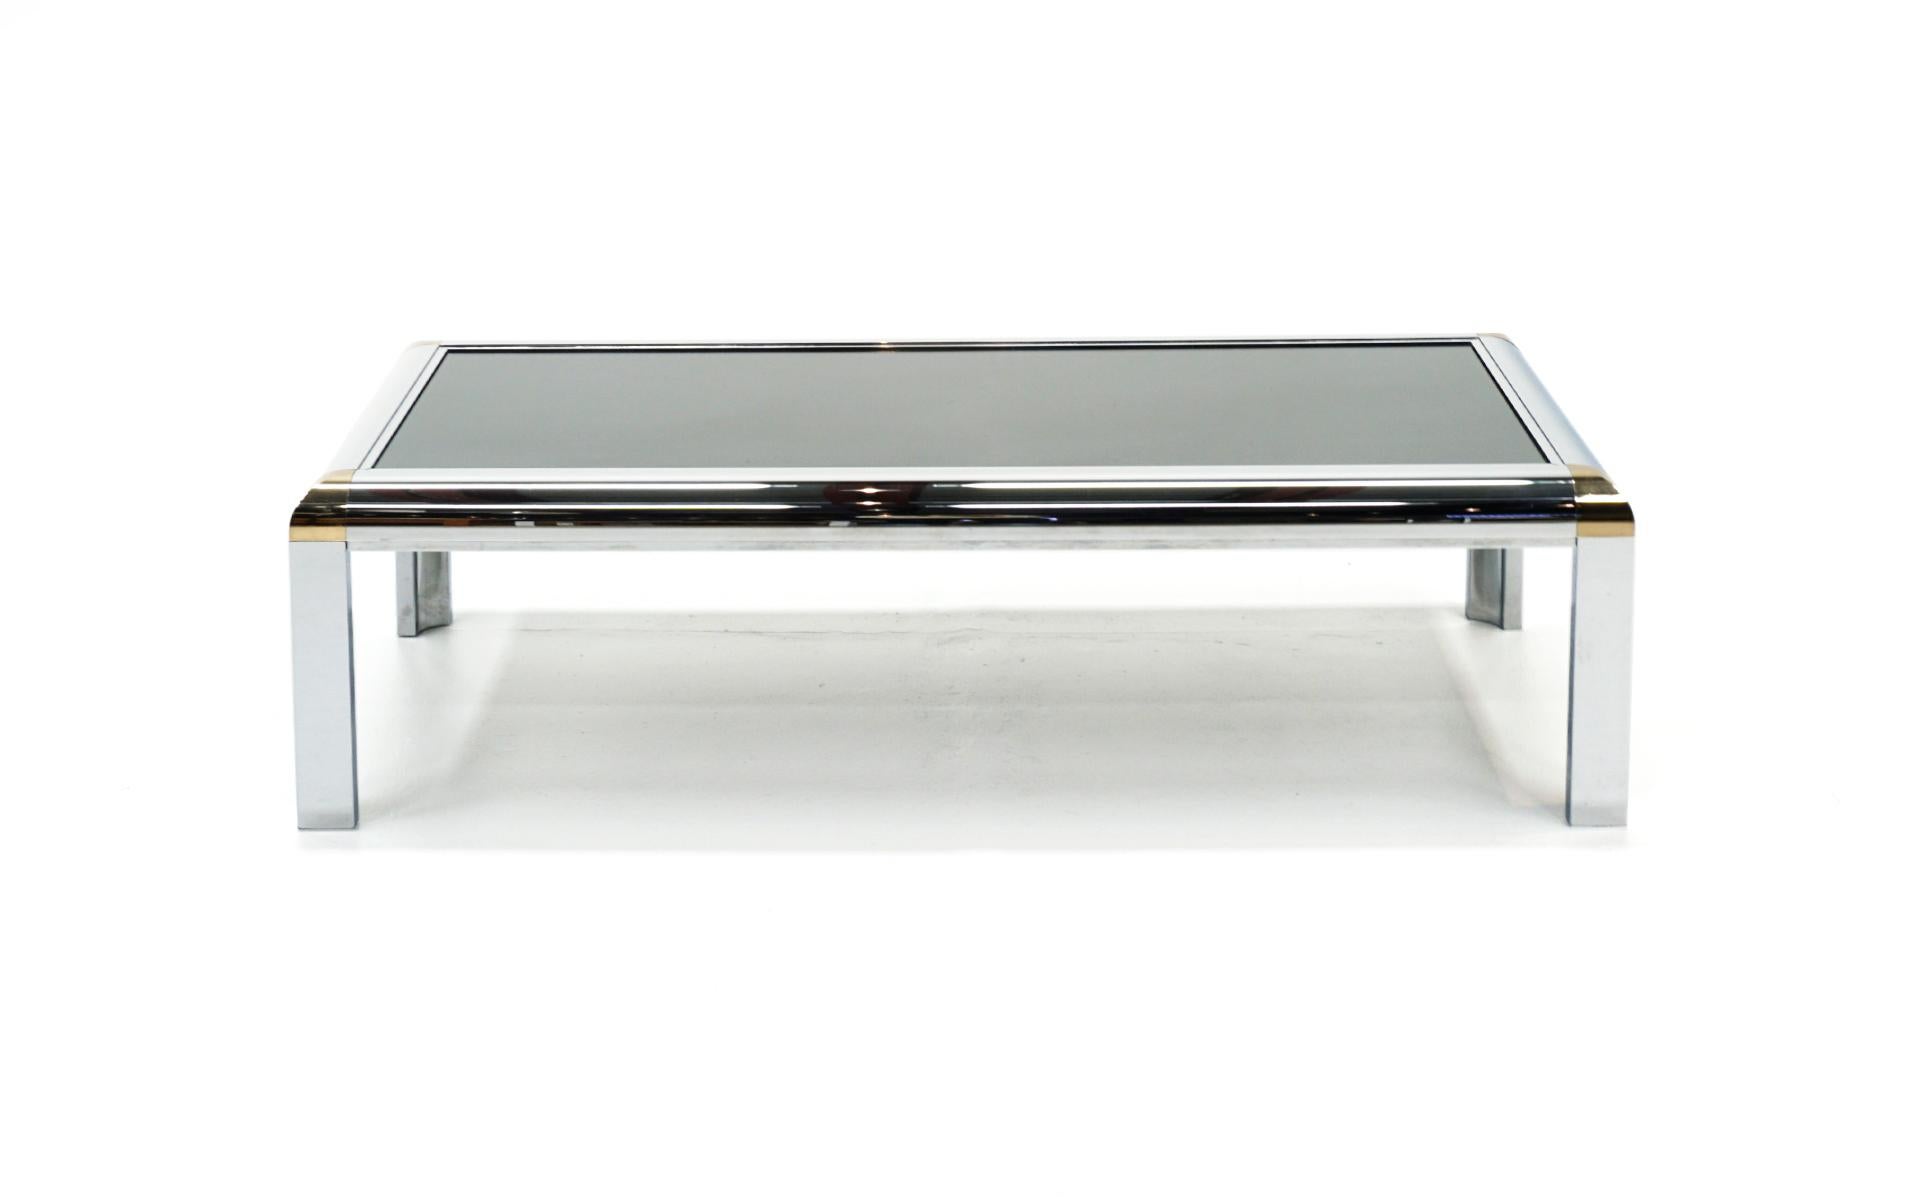 1970s coffee table with wide chrome frame and brass corner accents. Smoked gray / grey glass top. Only very light scratches to the tabletop, no pitting to the chrome. Priced to sell.